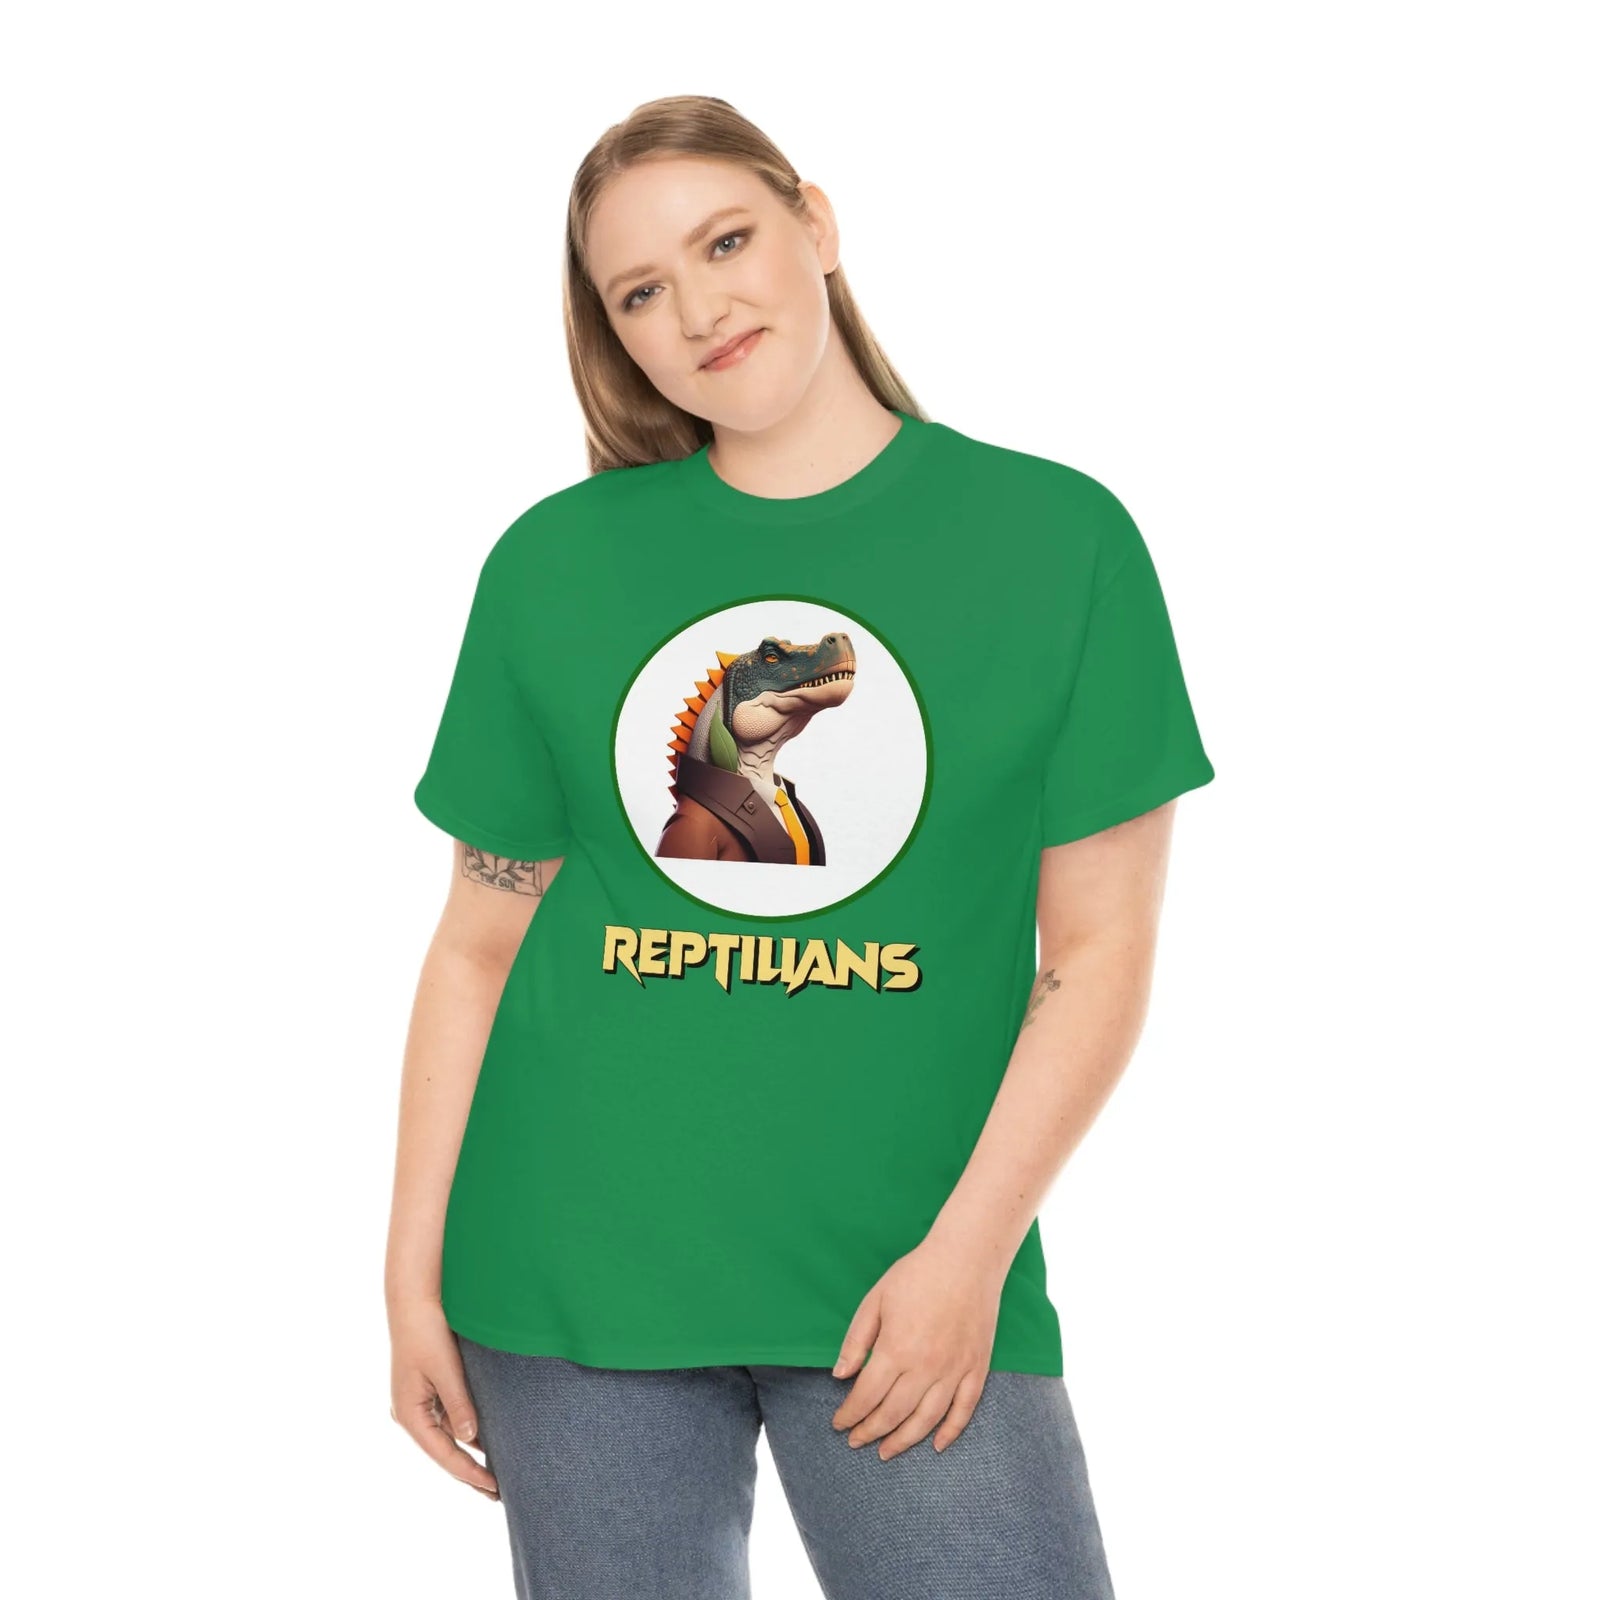 Reptilian Overlords Team Jersey